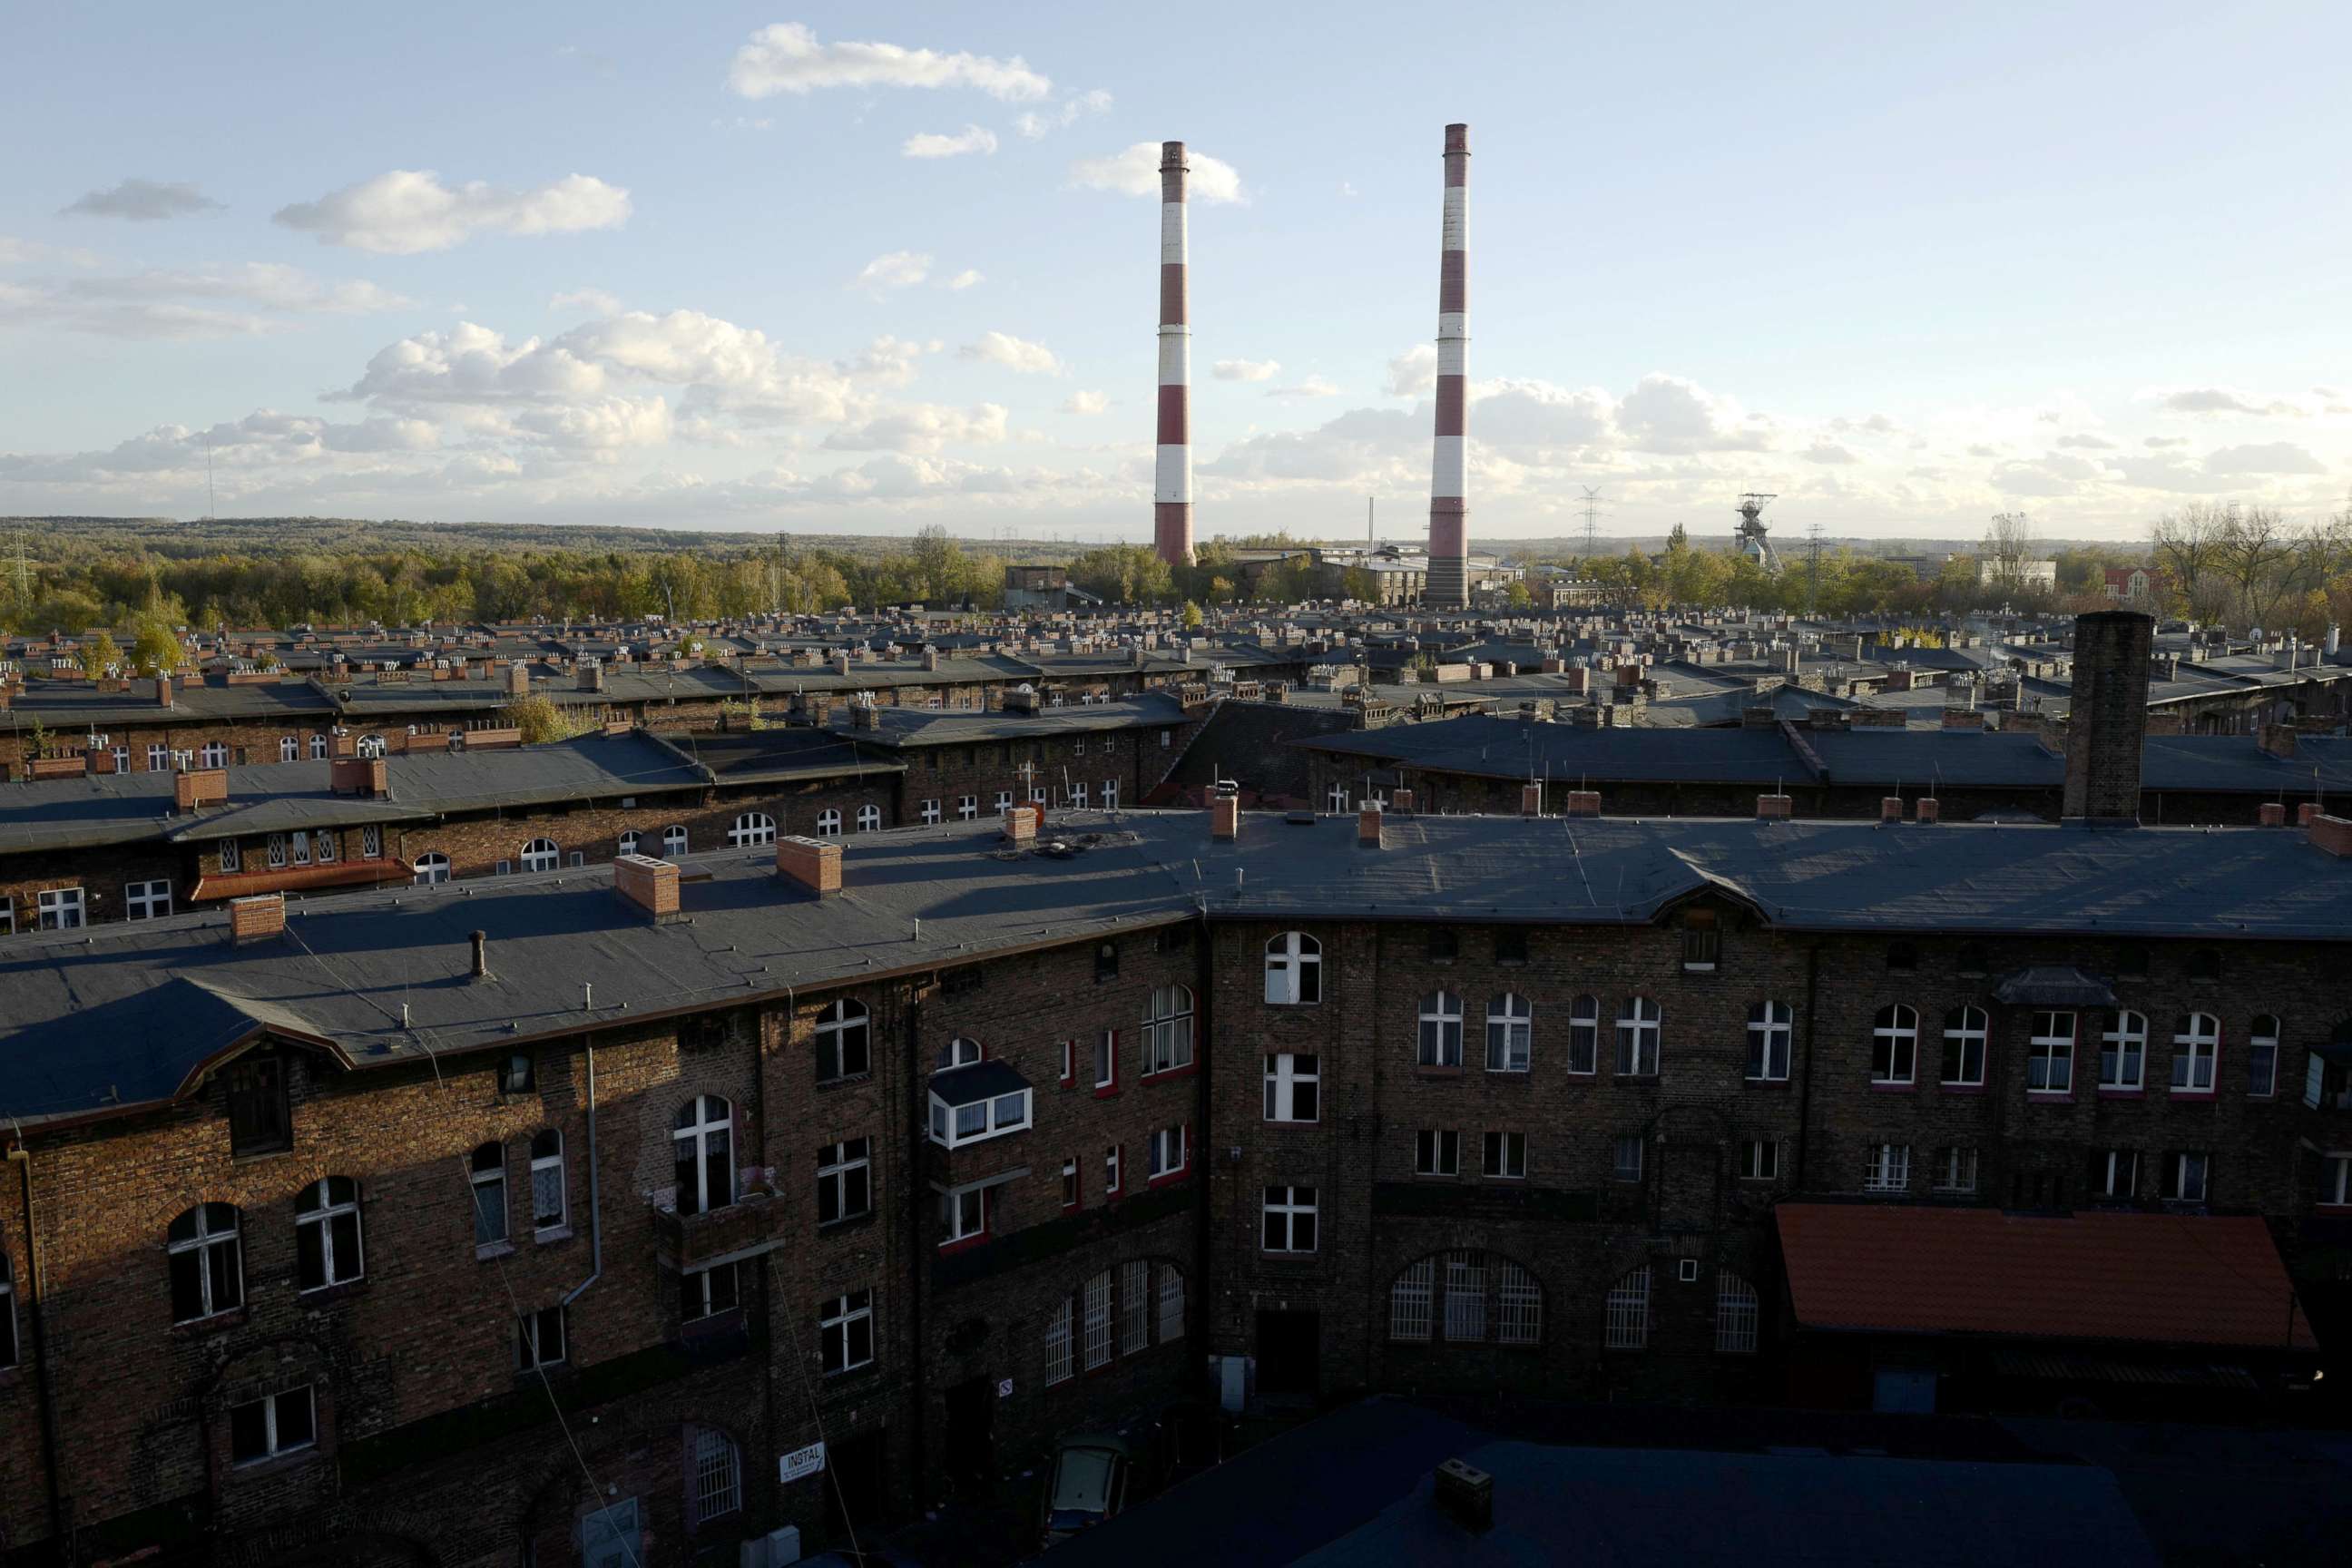 PHOTO: Houses and the Wieczorek mine power plant chimneys are seen in Nikiszowiec district in Katowice, Poland, Oct. 24, 2018.